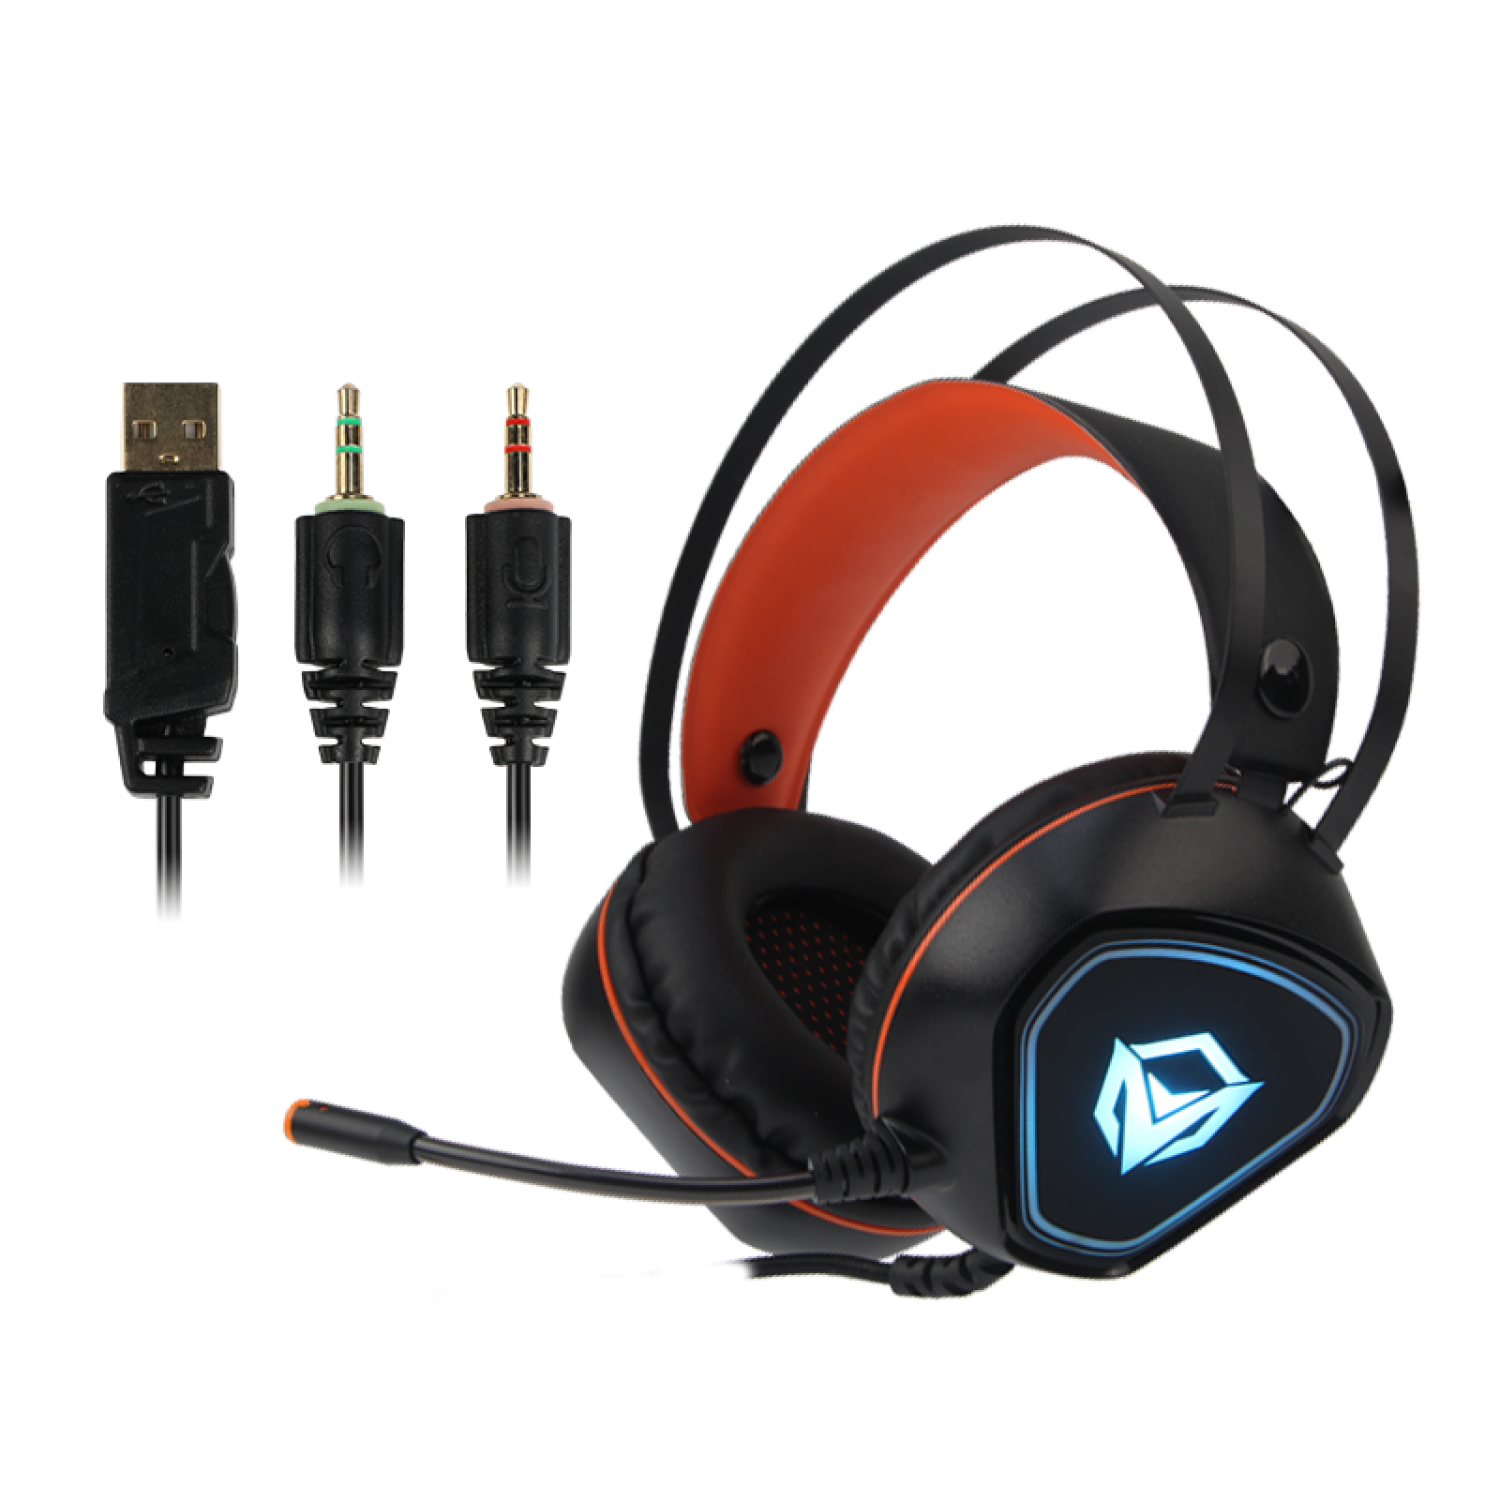 Meetion Backlit Gaming Headset, Noise Reduction, Vibration, Long Microphone - HP020